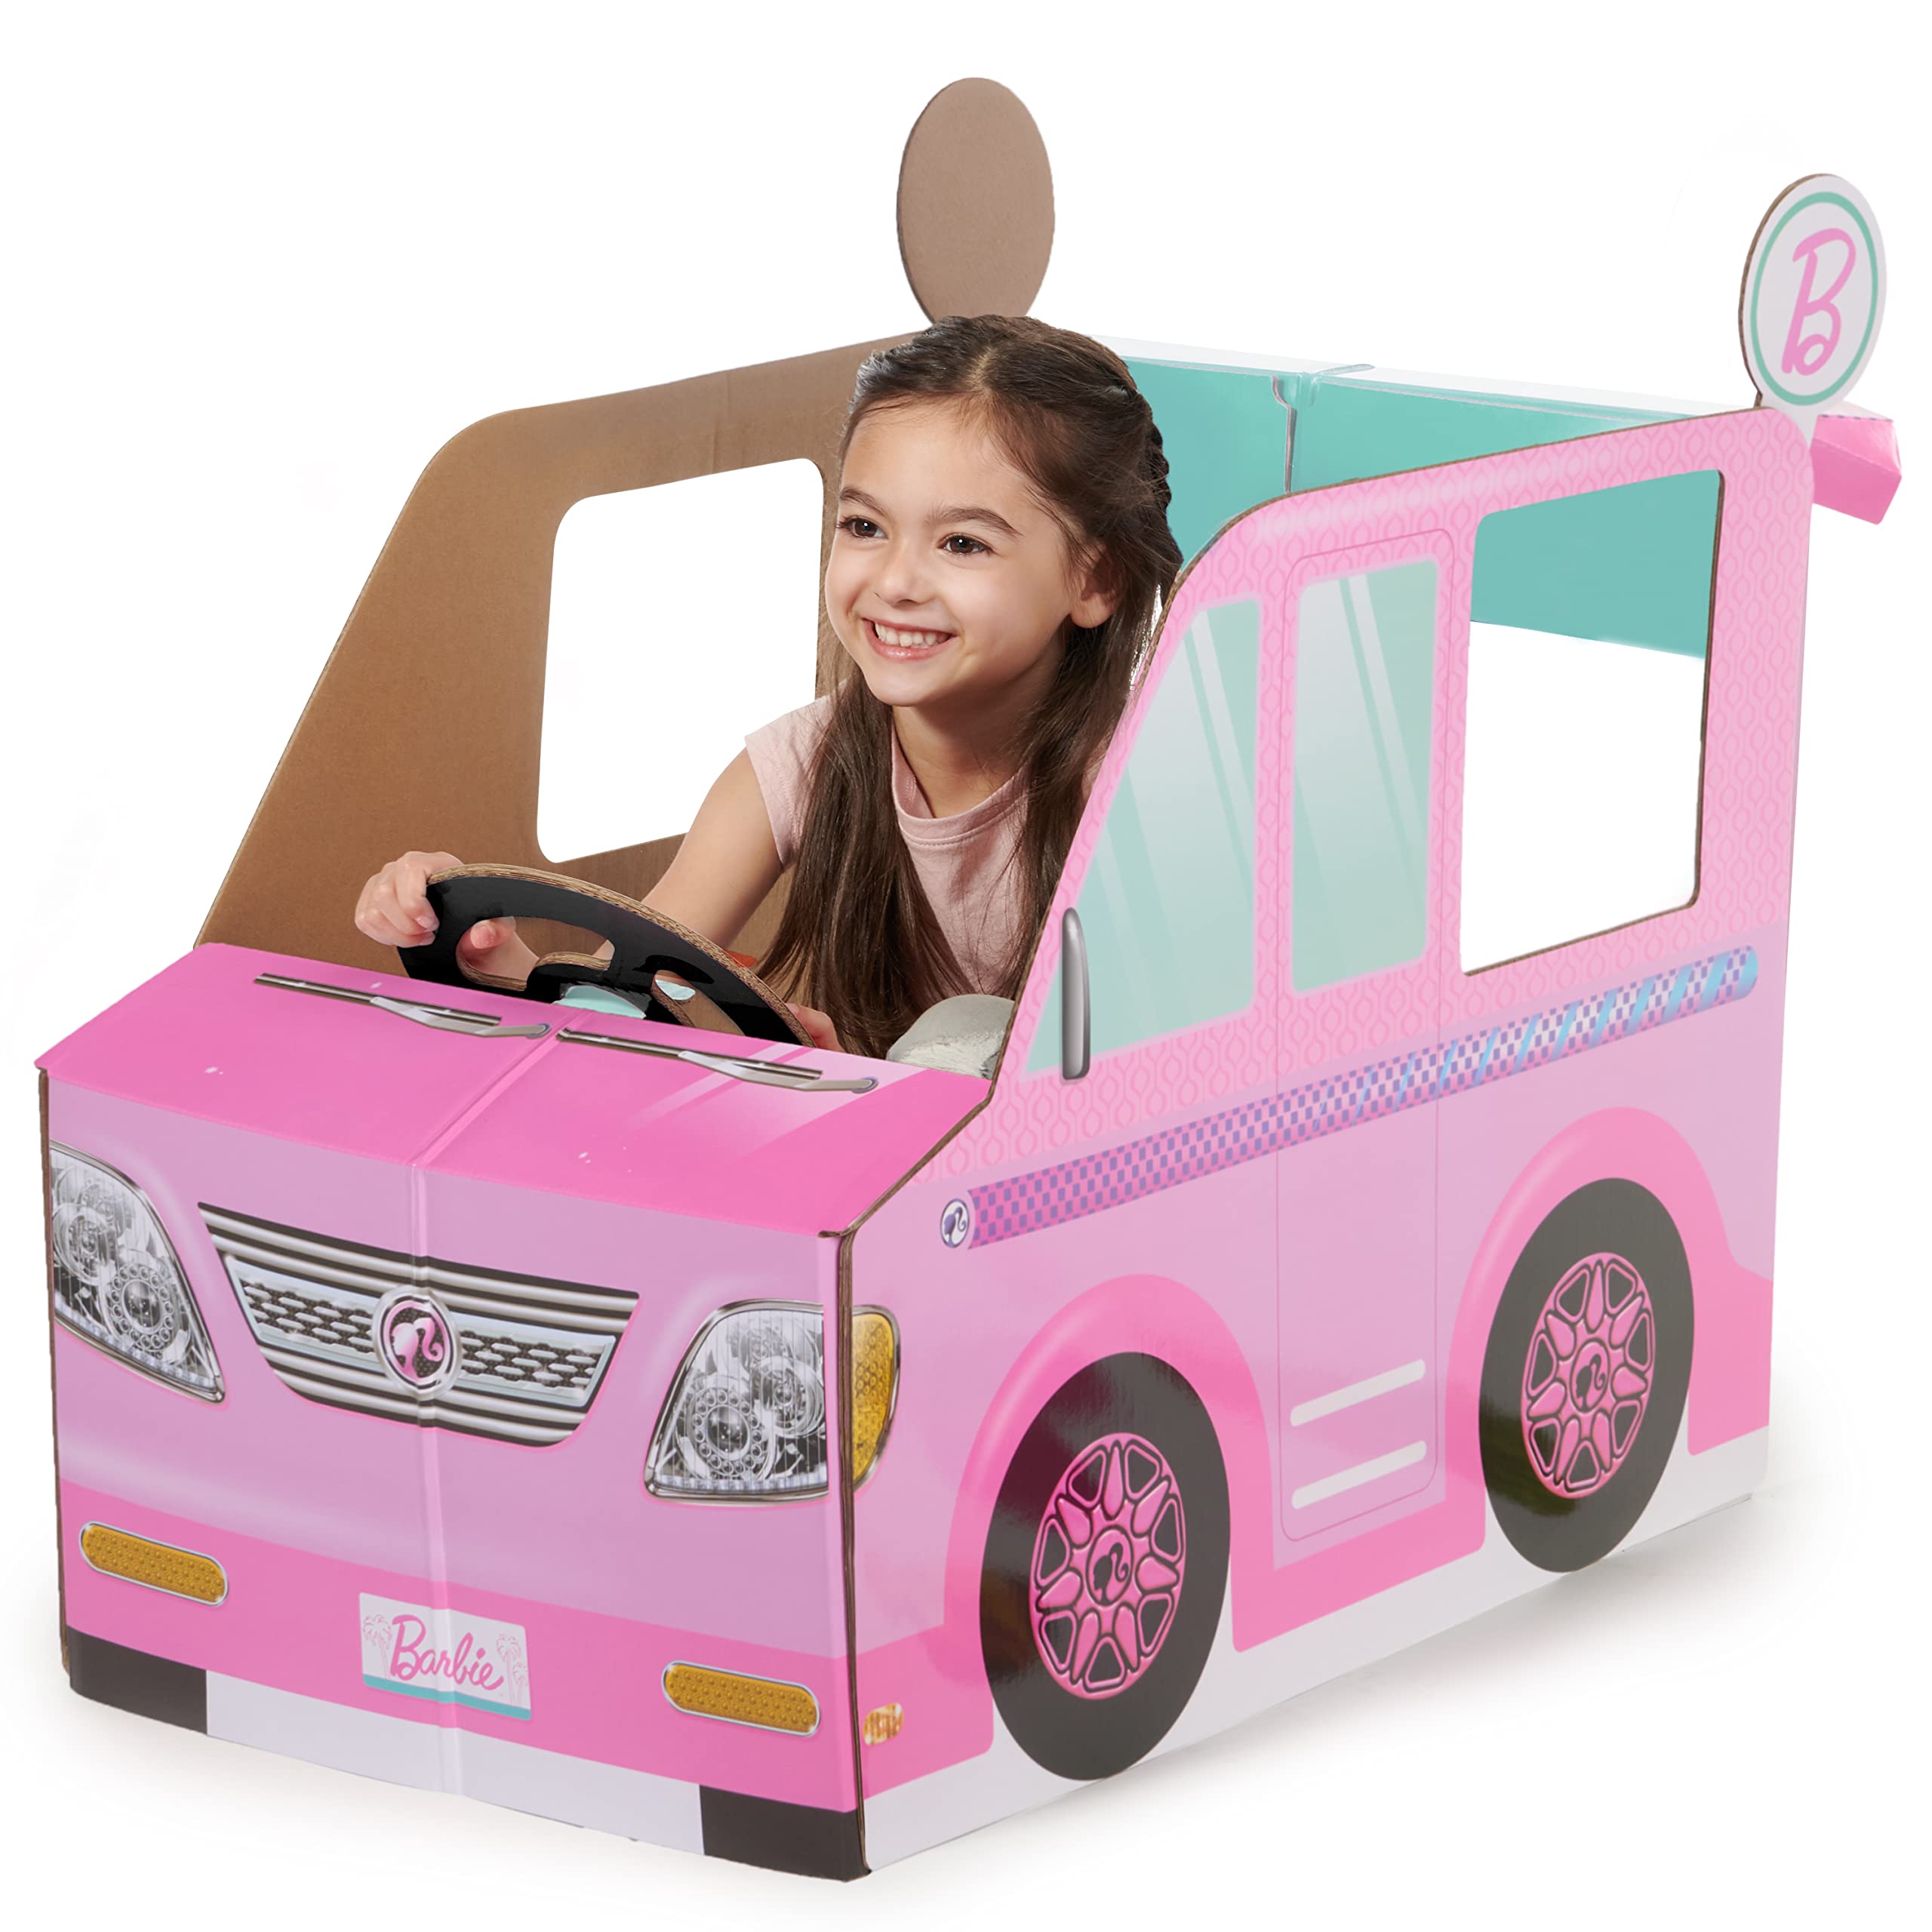 Pop2Play Barbie Toddler Camper - Indoor Pretend Play Car for Kids w/ 8 Accessories $8.95 + Free Shipping w/ Prime or on $25+